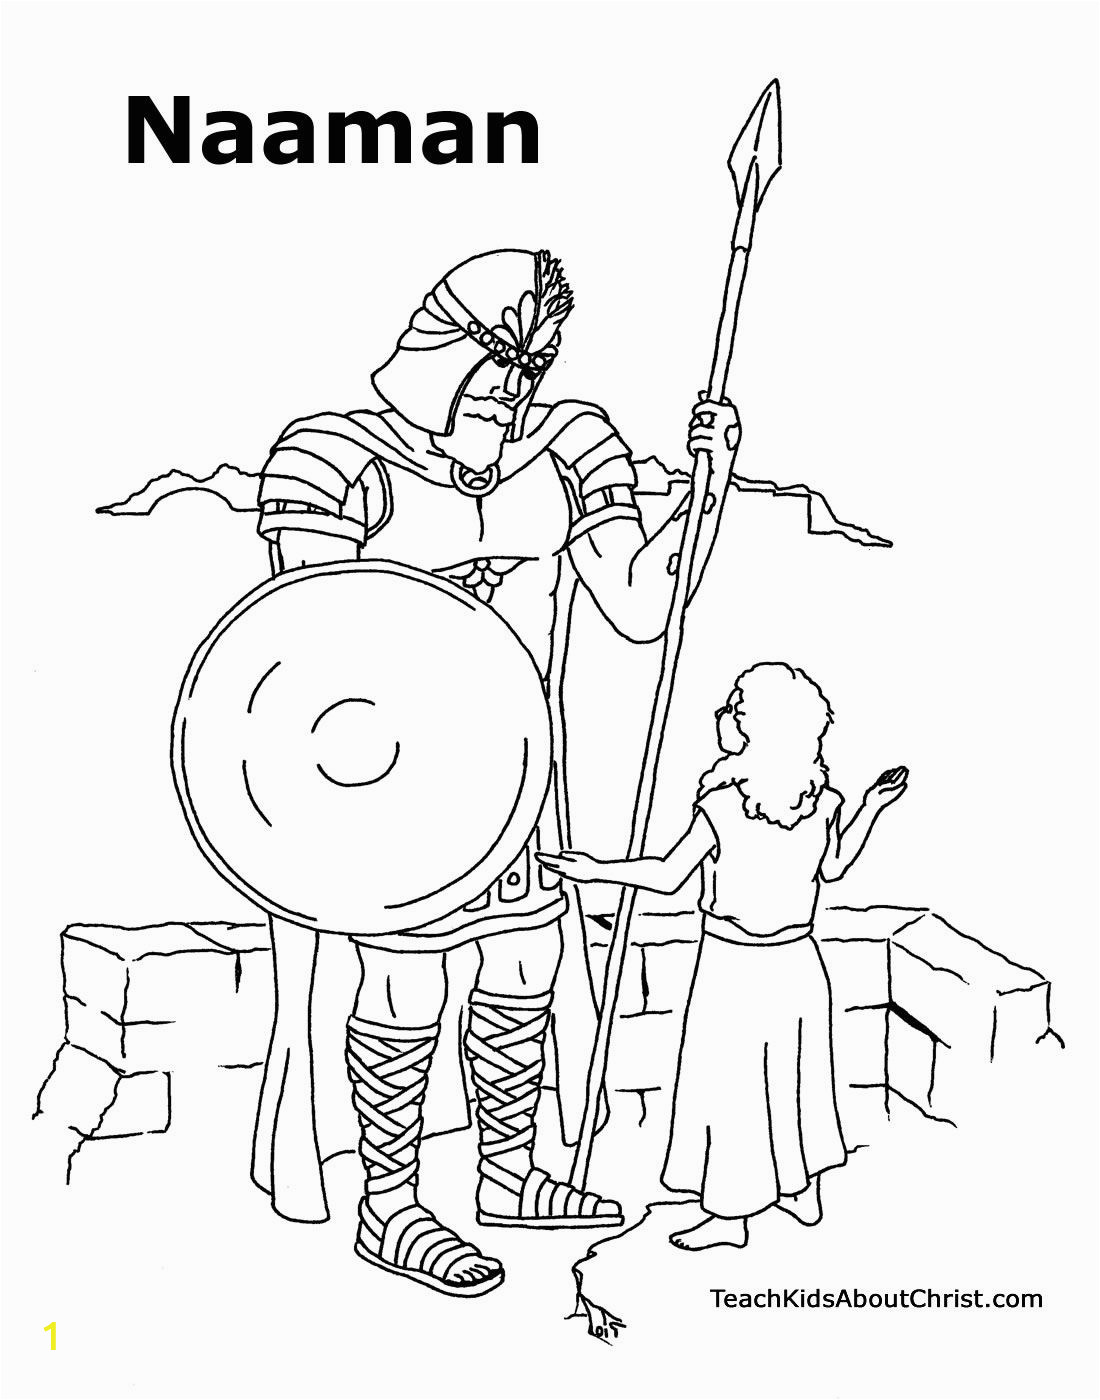 Naaman In the Bible Coloring Pages Naaman Coloring Page